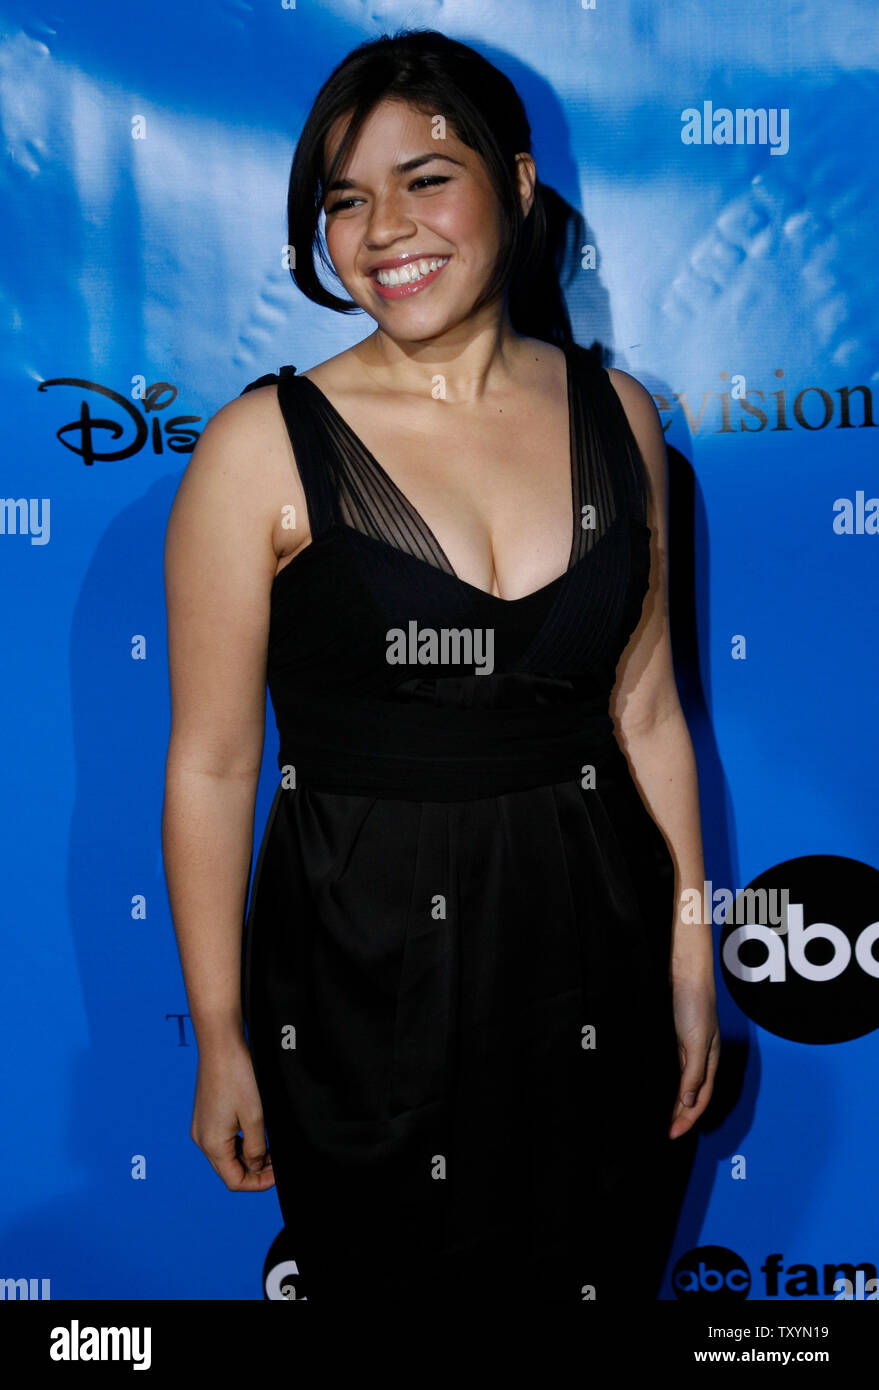 Actress America Ferrera of 'Ugly Betty' arrives at the ABC party for the Television Critics Association Press Tour in Pasadena, California on January 14, 2007. (UPI Photo/Gus Ruelas) Stock Photo